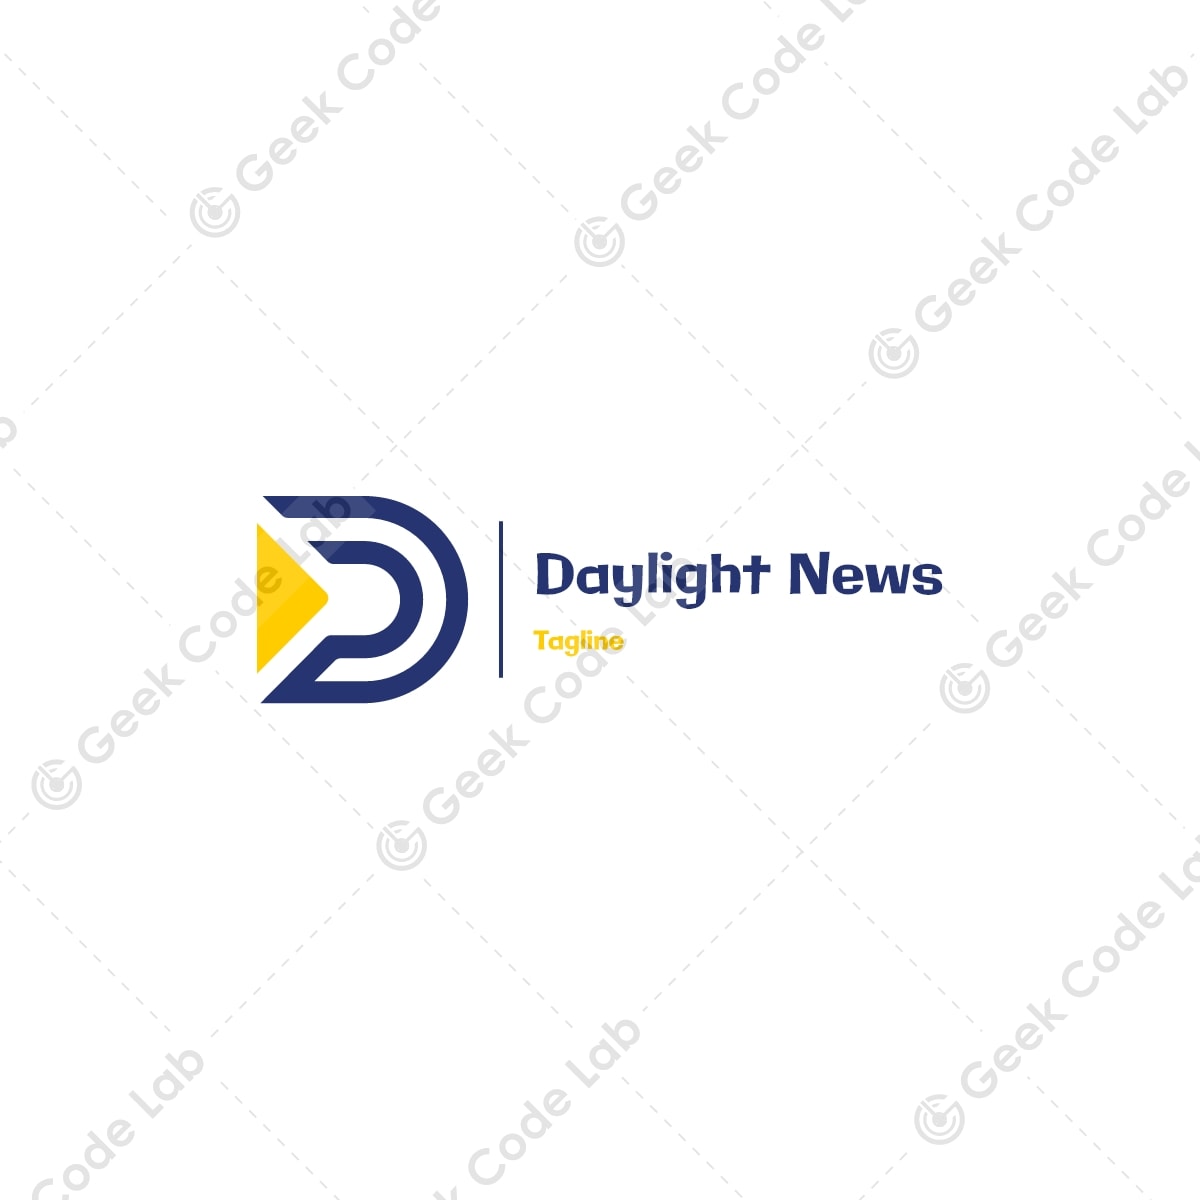 News Agency Logo Design Template | PosterMyWall